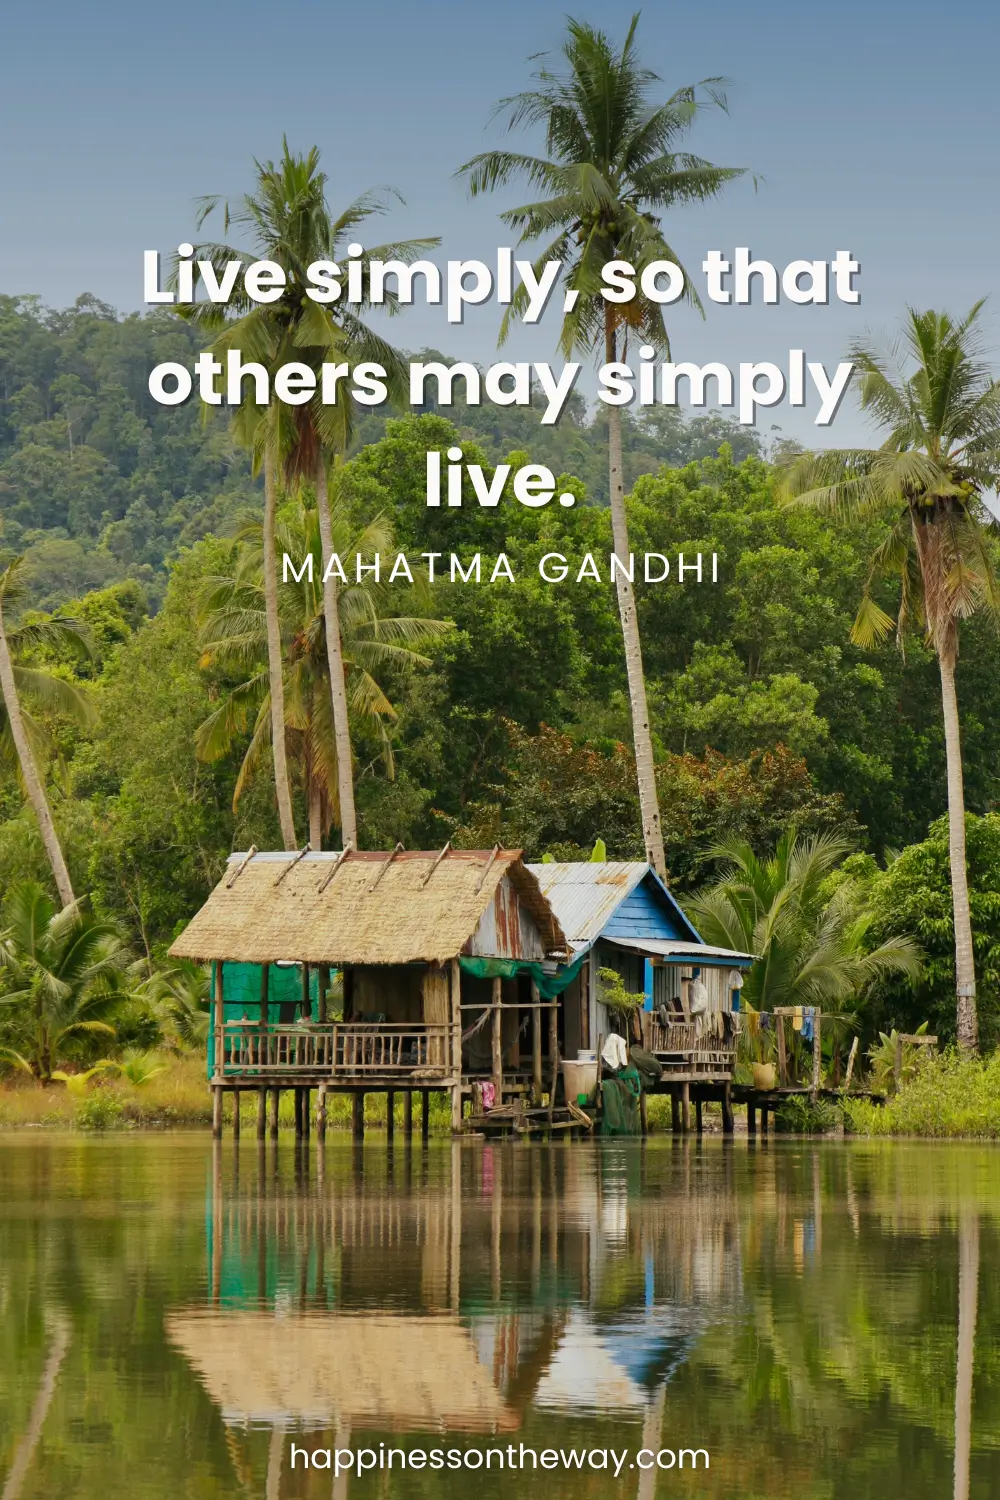 A simple bamboo hut house in Cambodia over a river and with coconut trees as a background with an inspiring quote Live simply, so that others may simply live.” by Mahatma Gandhi